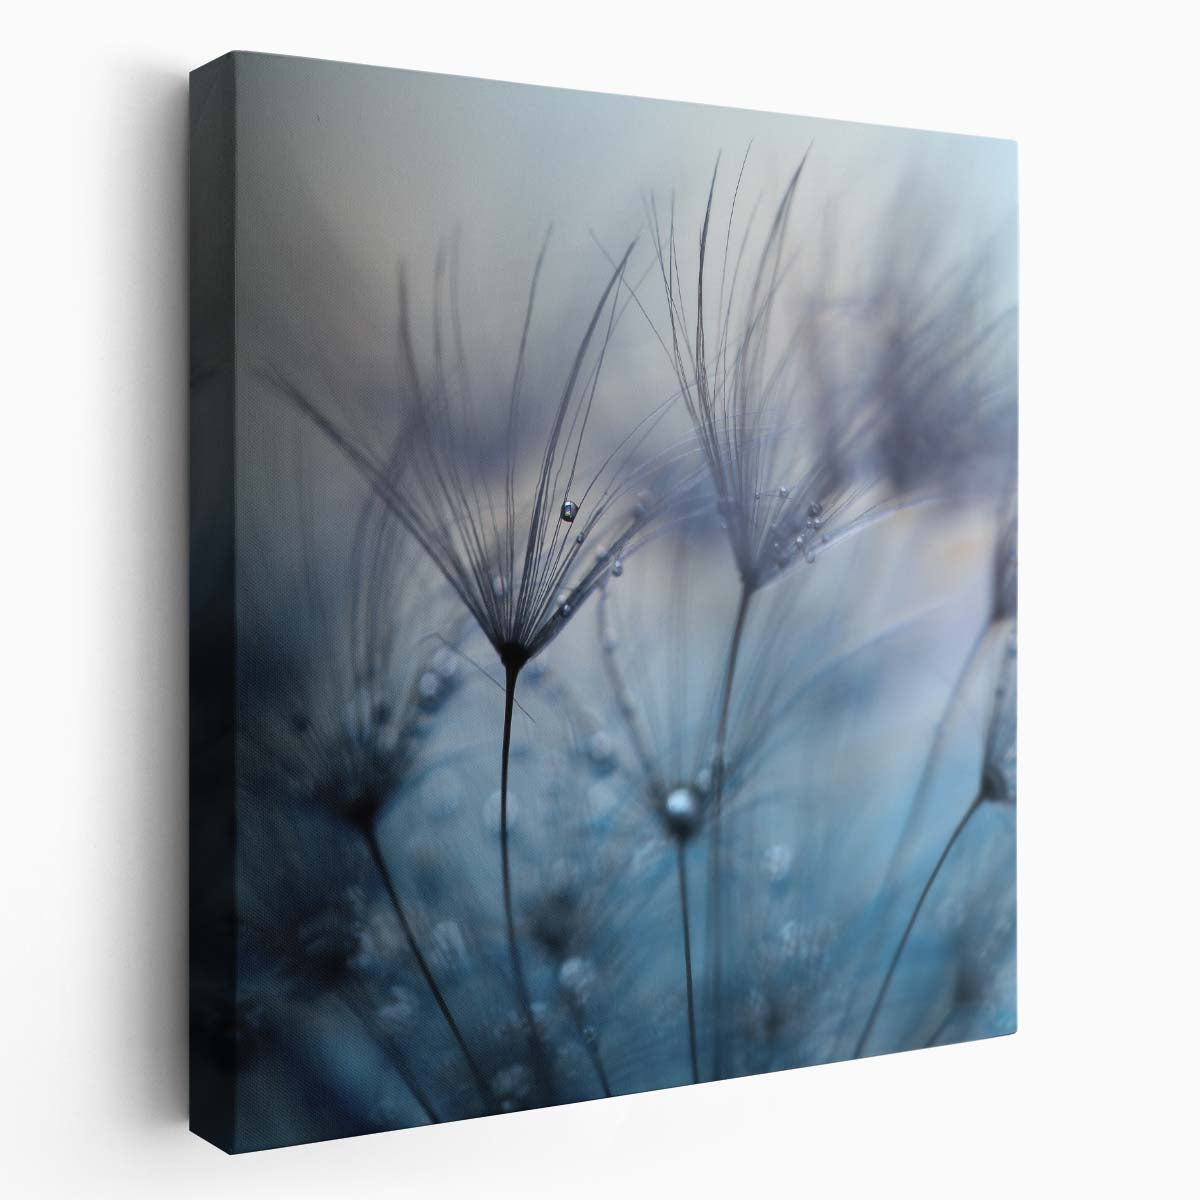 Delicate Dandelion Dew Drops Floral Macro Photography Wall Art by Luxuriance Designs. Made in USA.